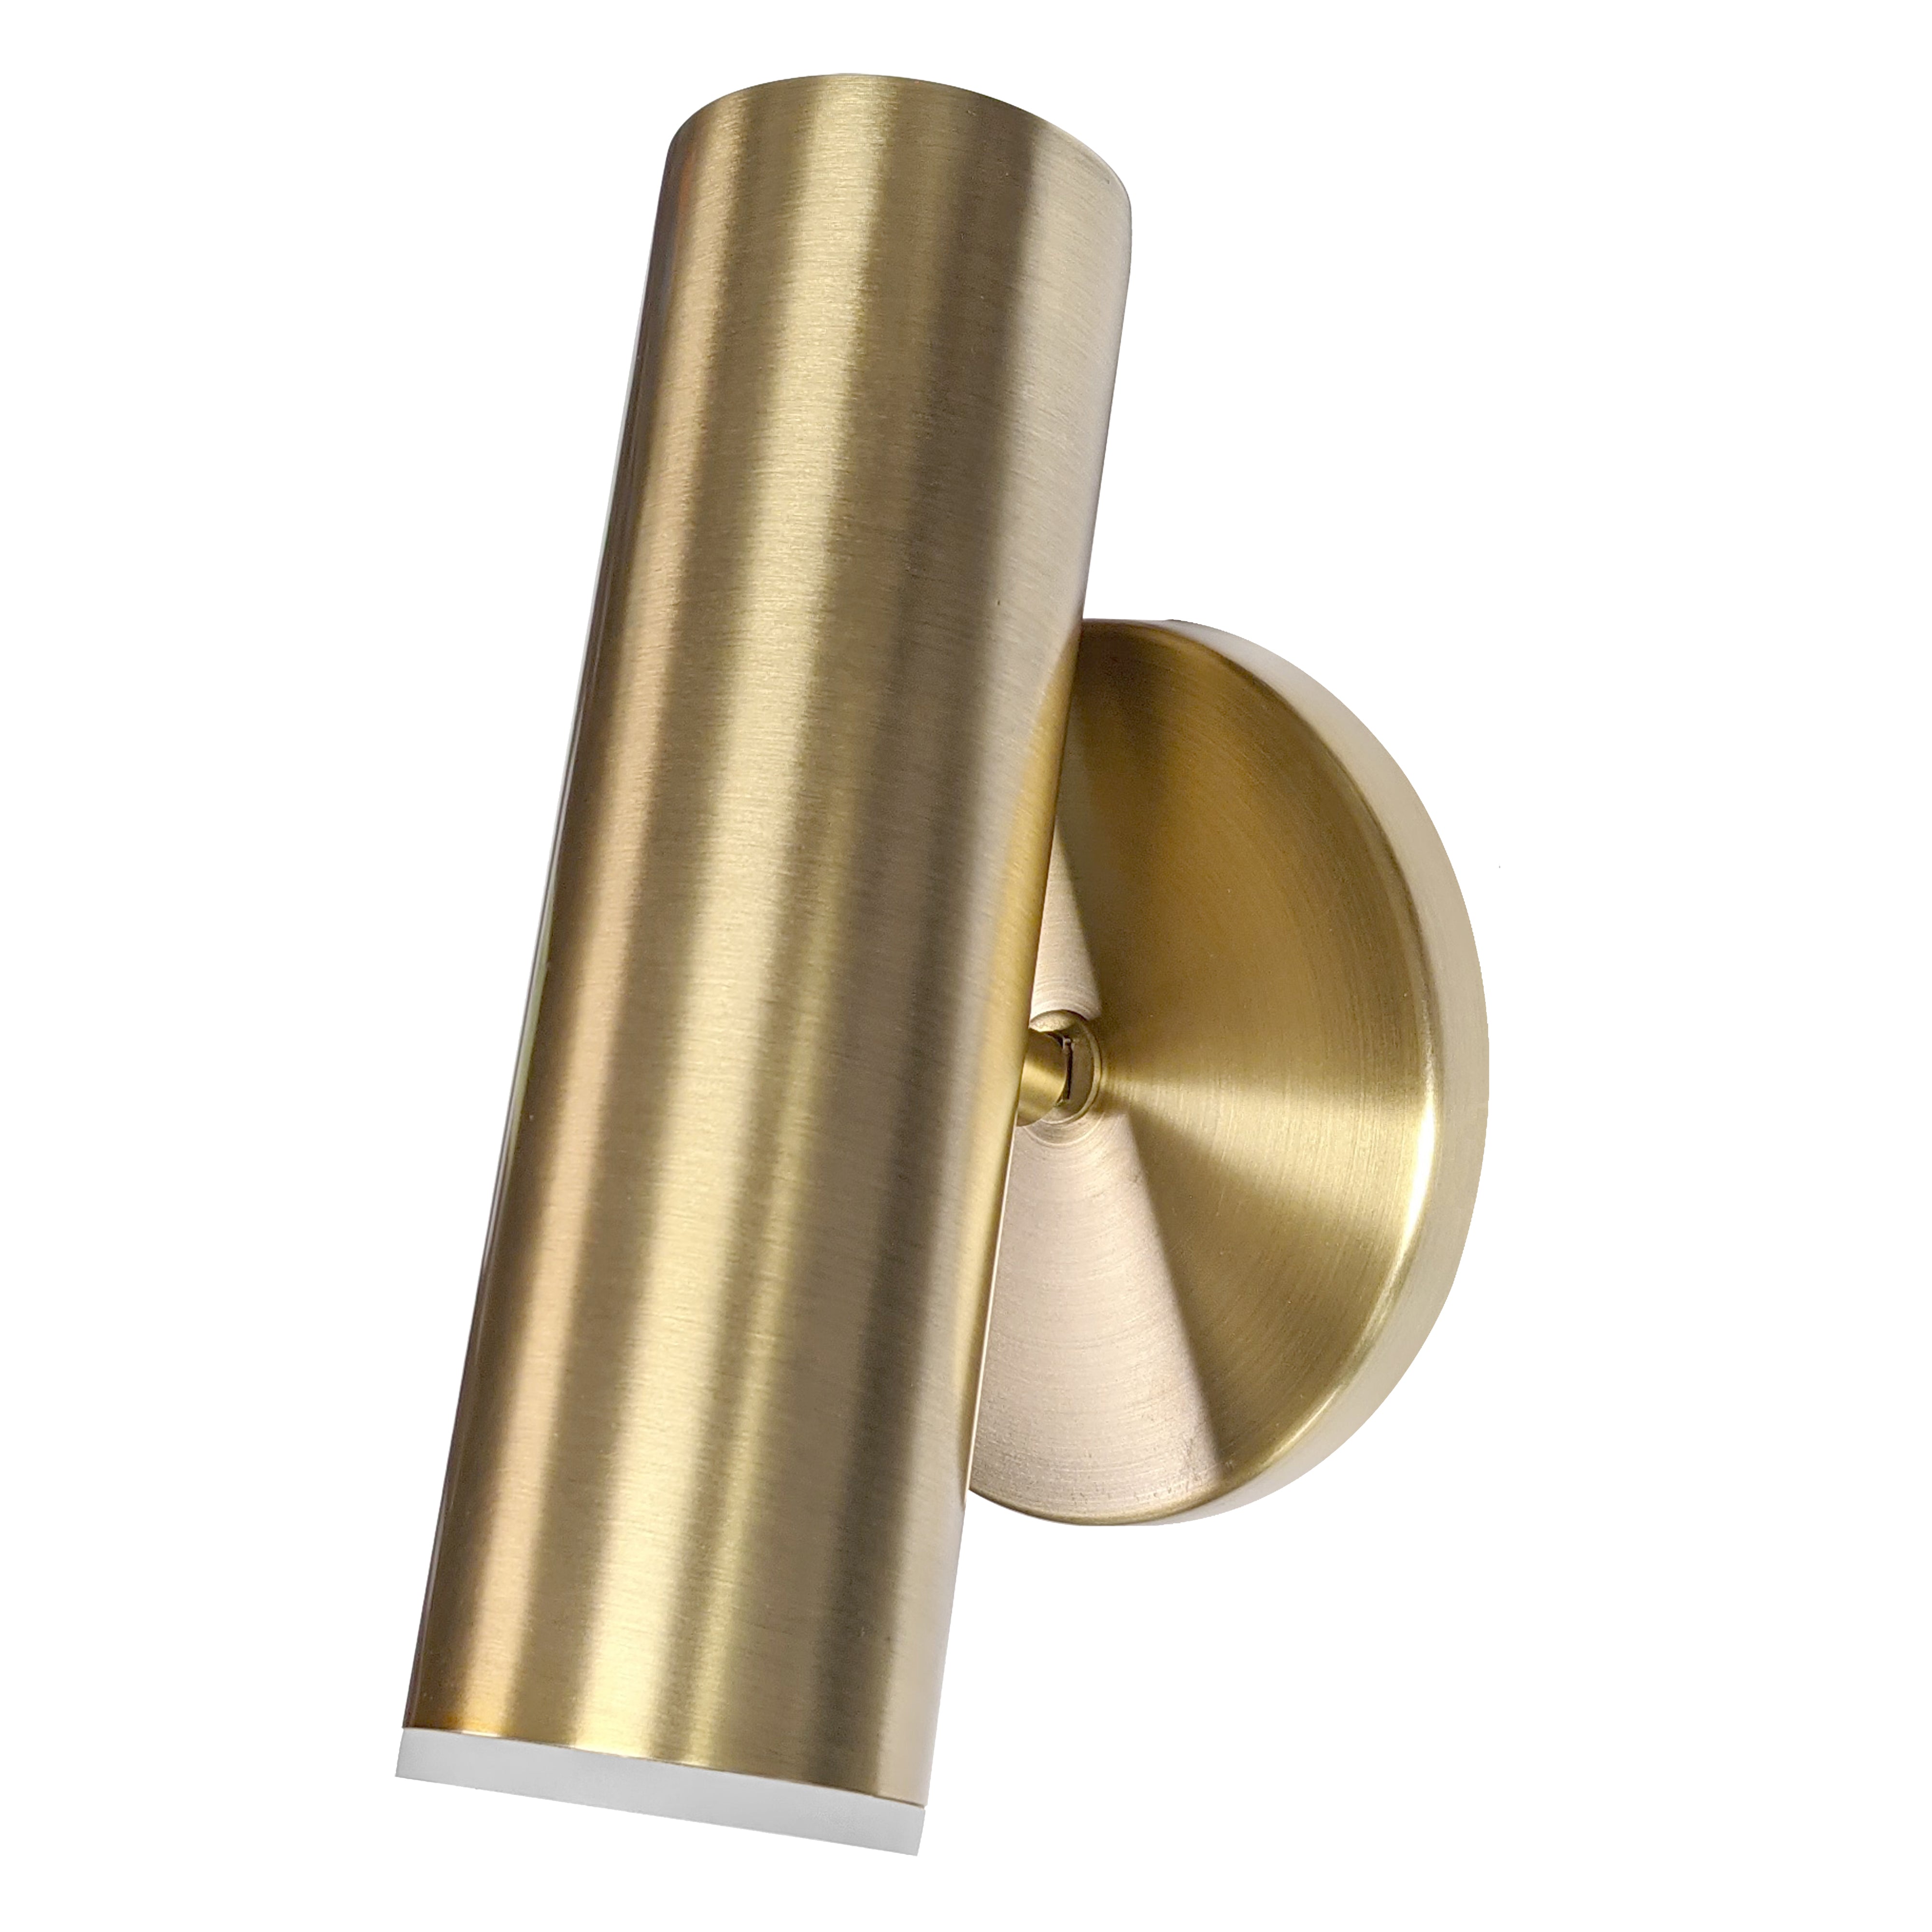 CONSTANCE Wall sconce Gold INTEGRATED LED - CST-106LEDW-AGB | DAINOLITE